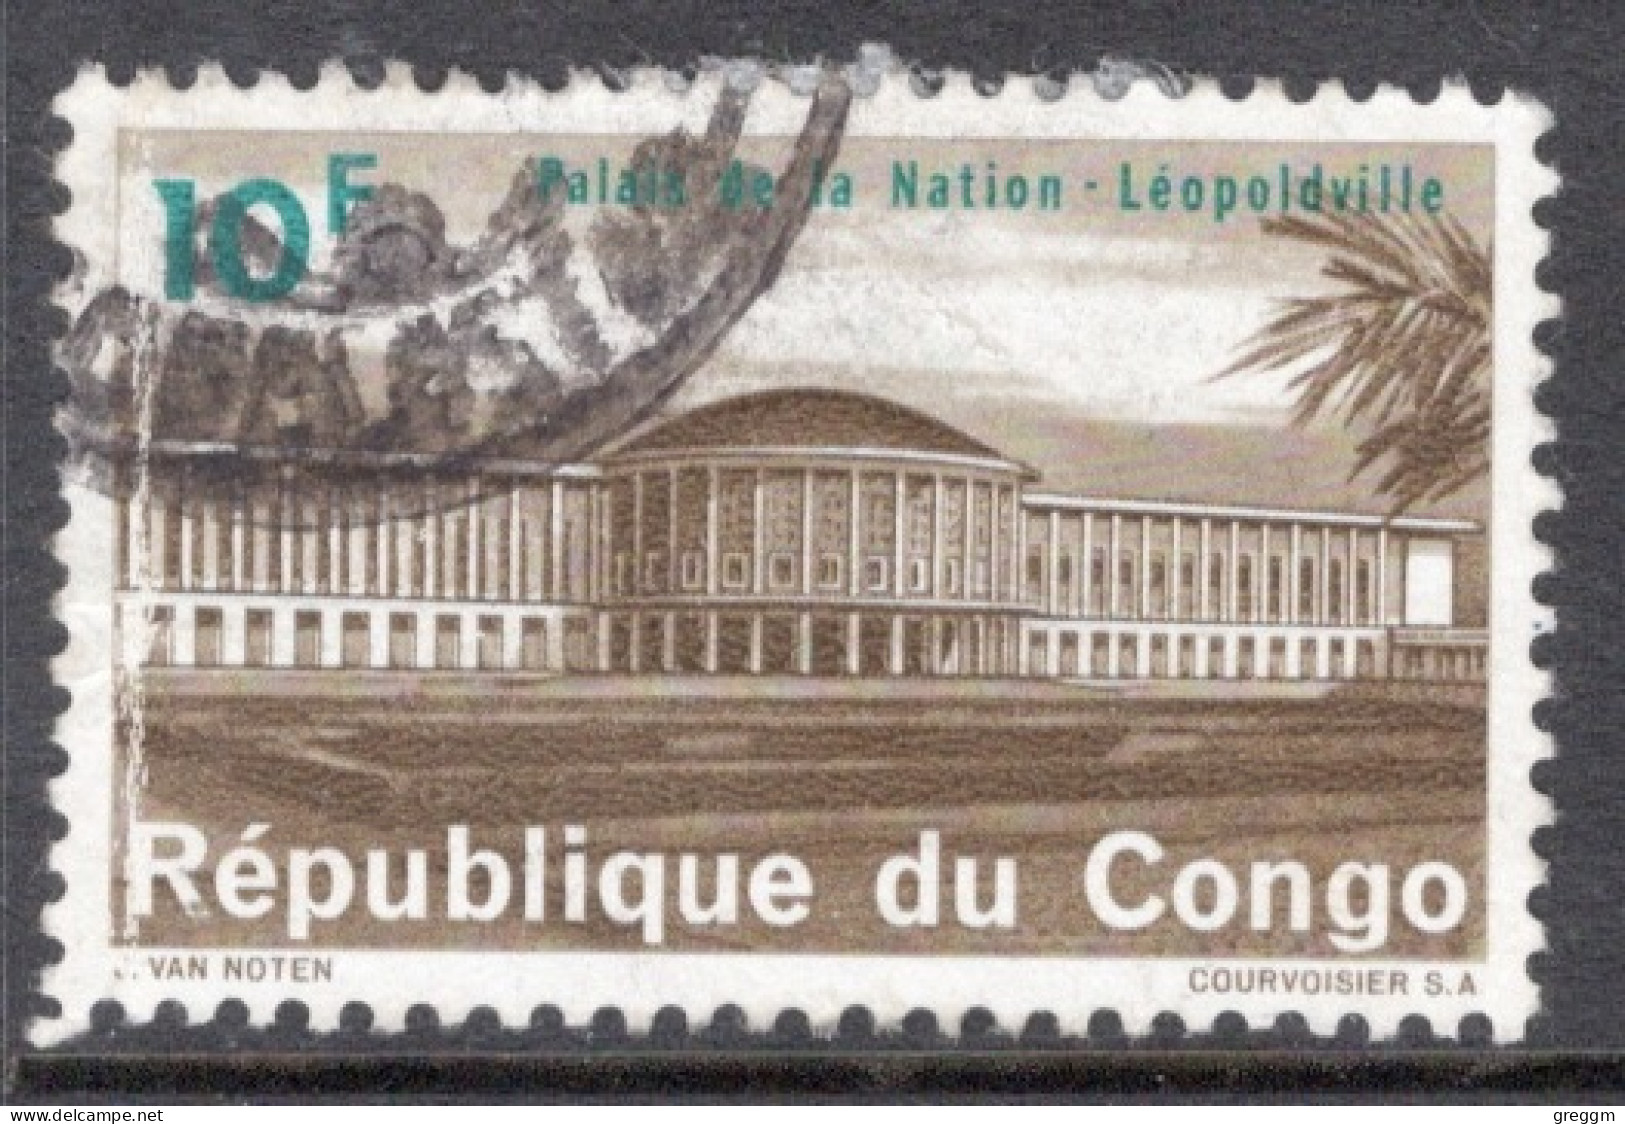 Kinshasa Congo 1964 Single 10f Stamp From The Definitive Set  National Palace, Leopoldville  In Fine Used. - Gebraucht